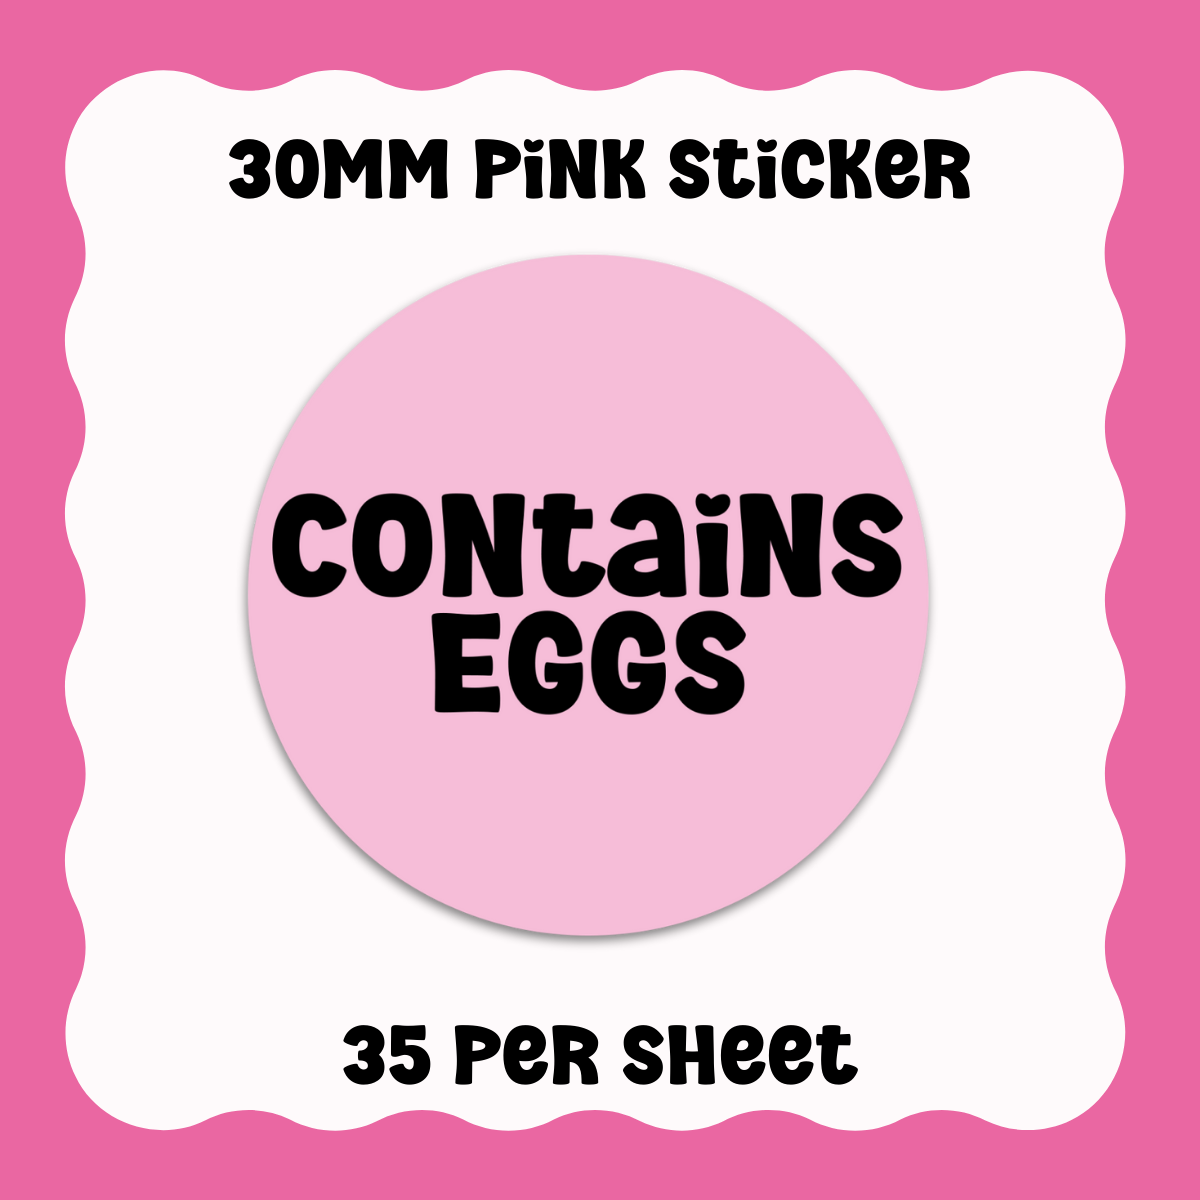 Contains Eggs Stickers - Text only